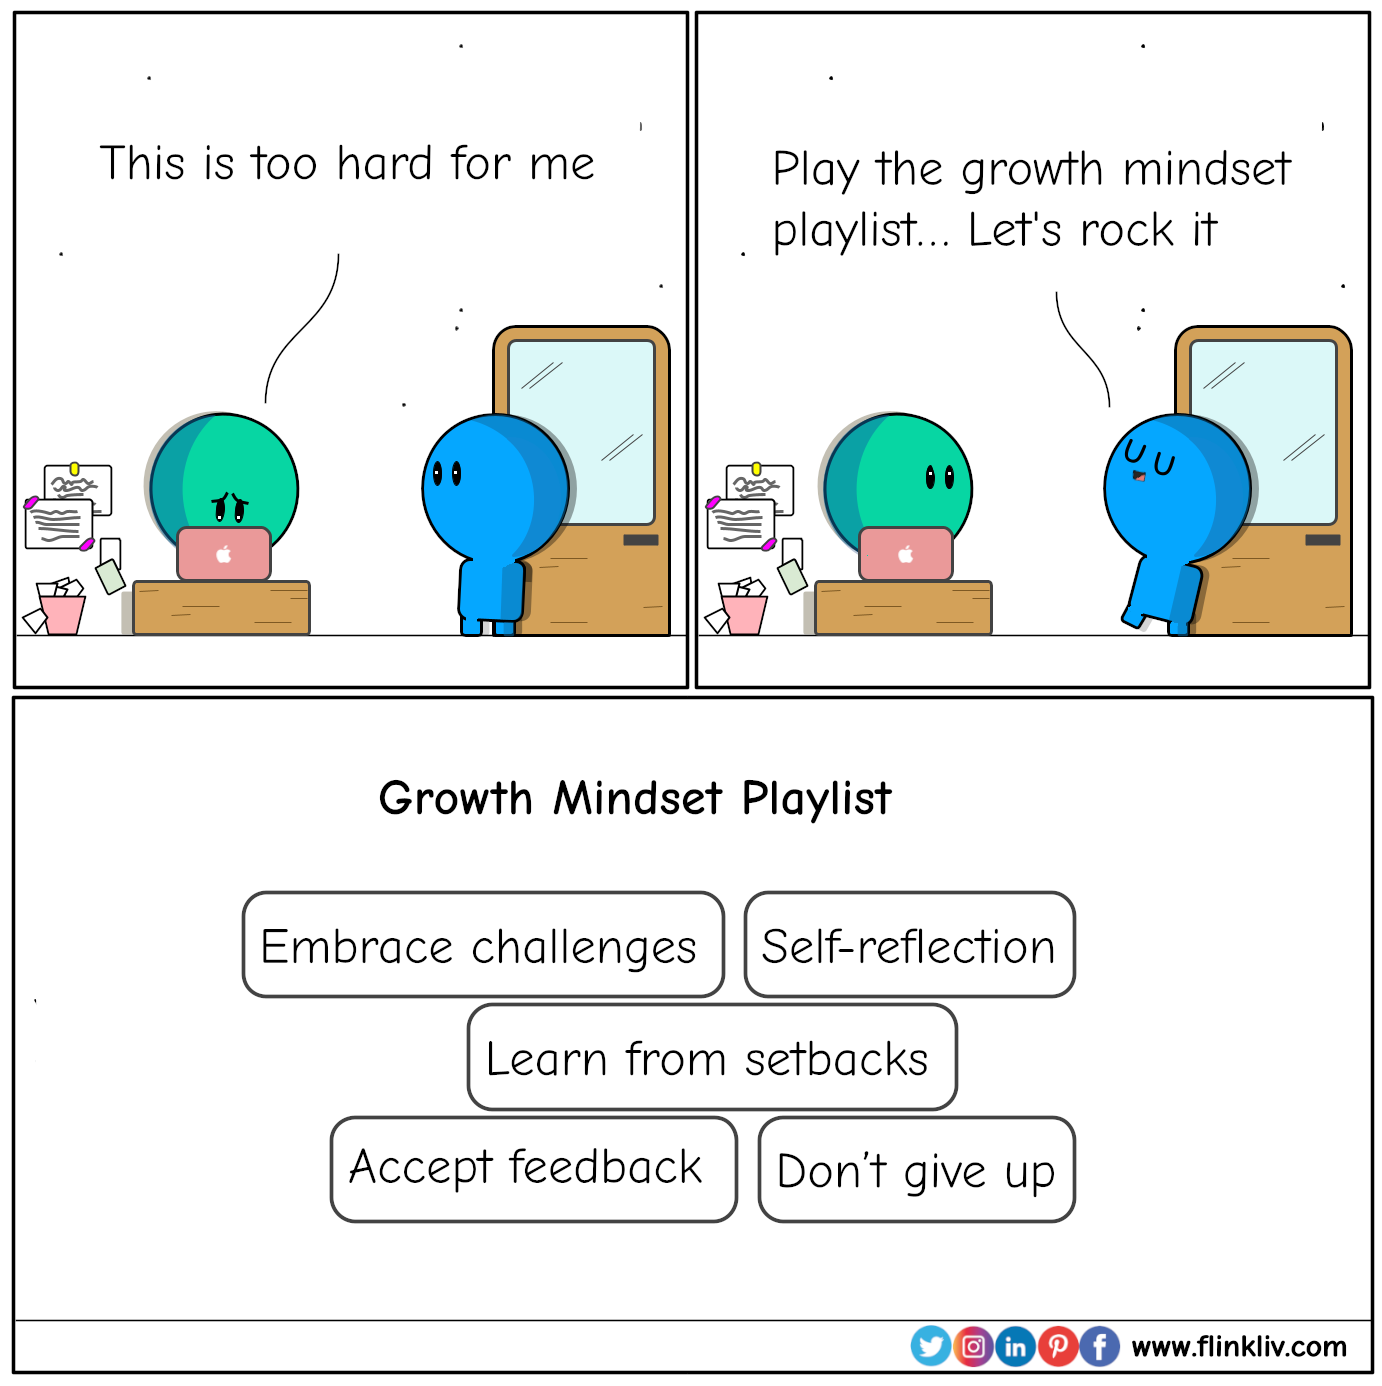 Conversation between A and B about growth-mindset. A: This is too hard for me.
					B: Play the growth mindset playlist. Let’s rock this challenge

					Embrace challenges
					Learn from setbacks
					Don’t give up
					Accept feedback
					Self-reflection
					by FlinkLiv.com
					